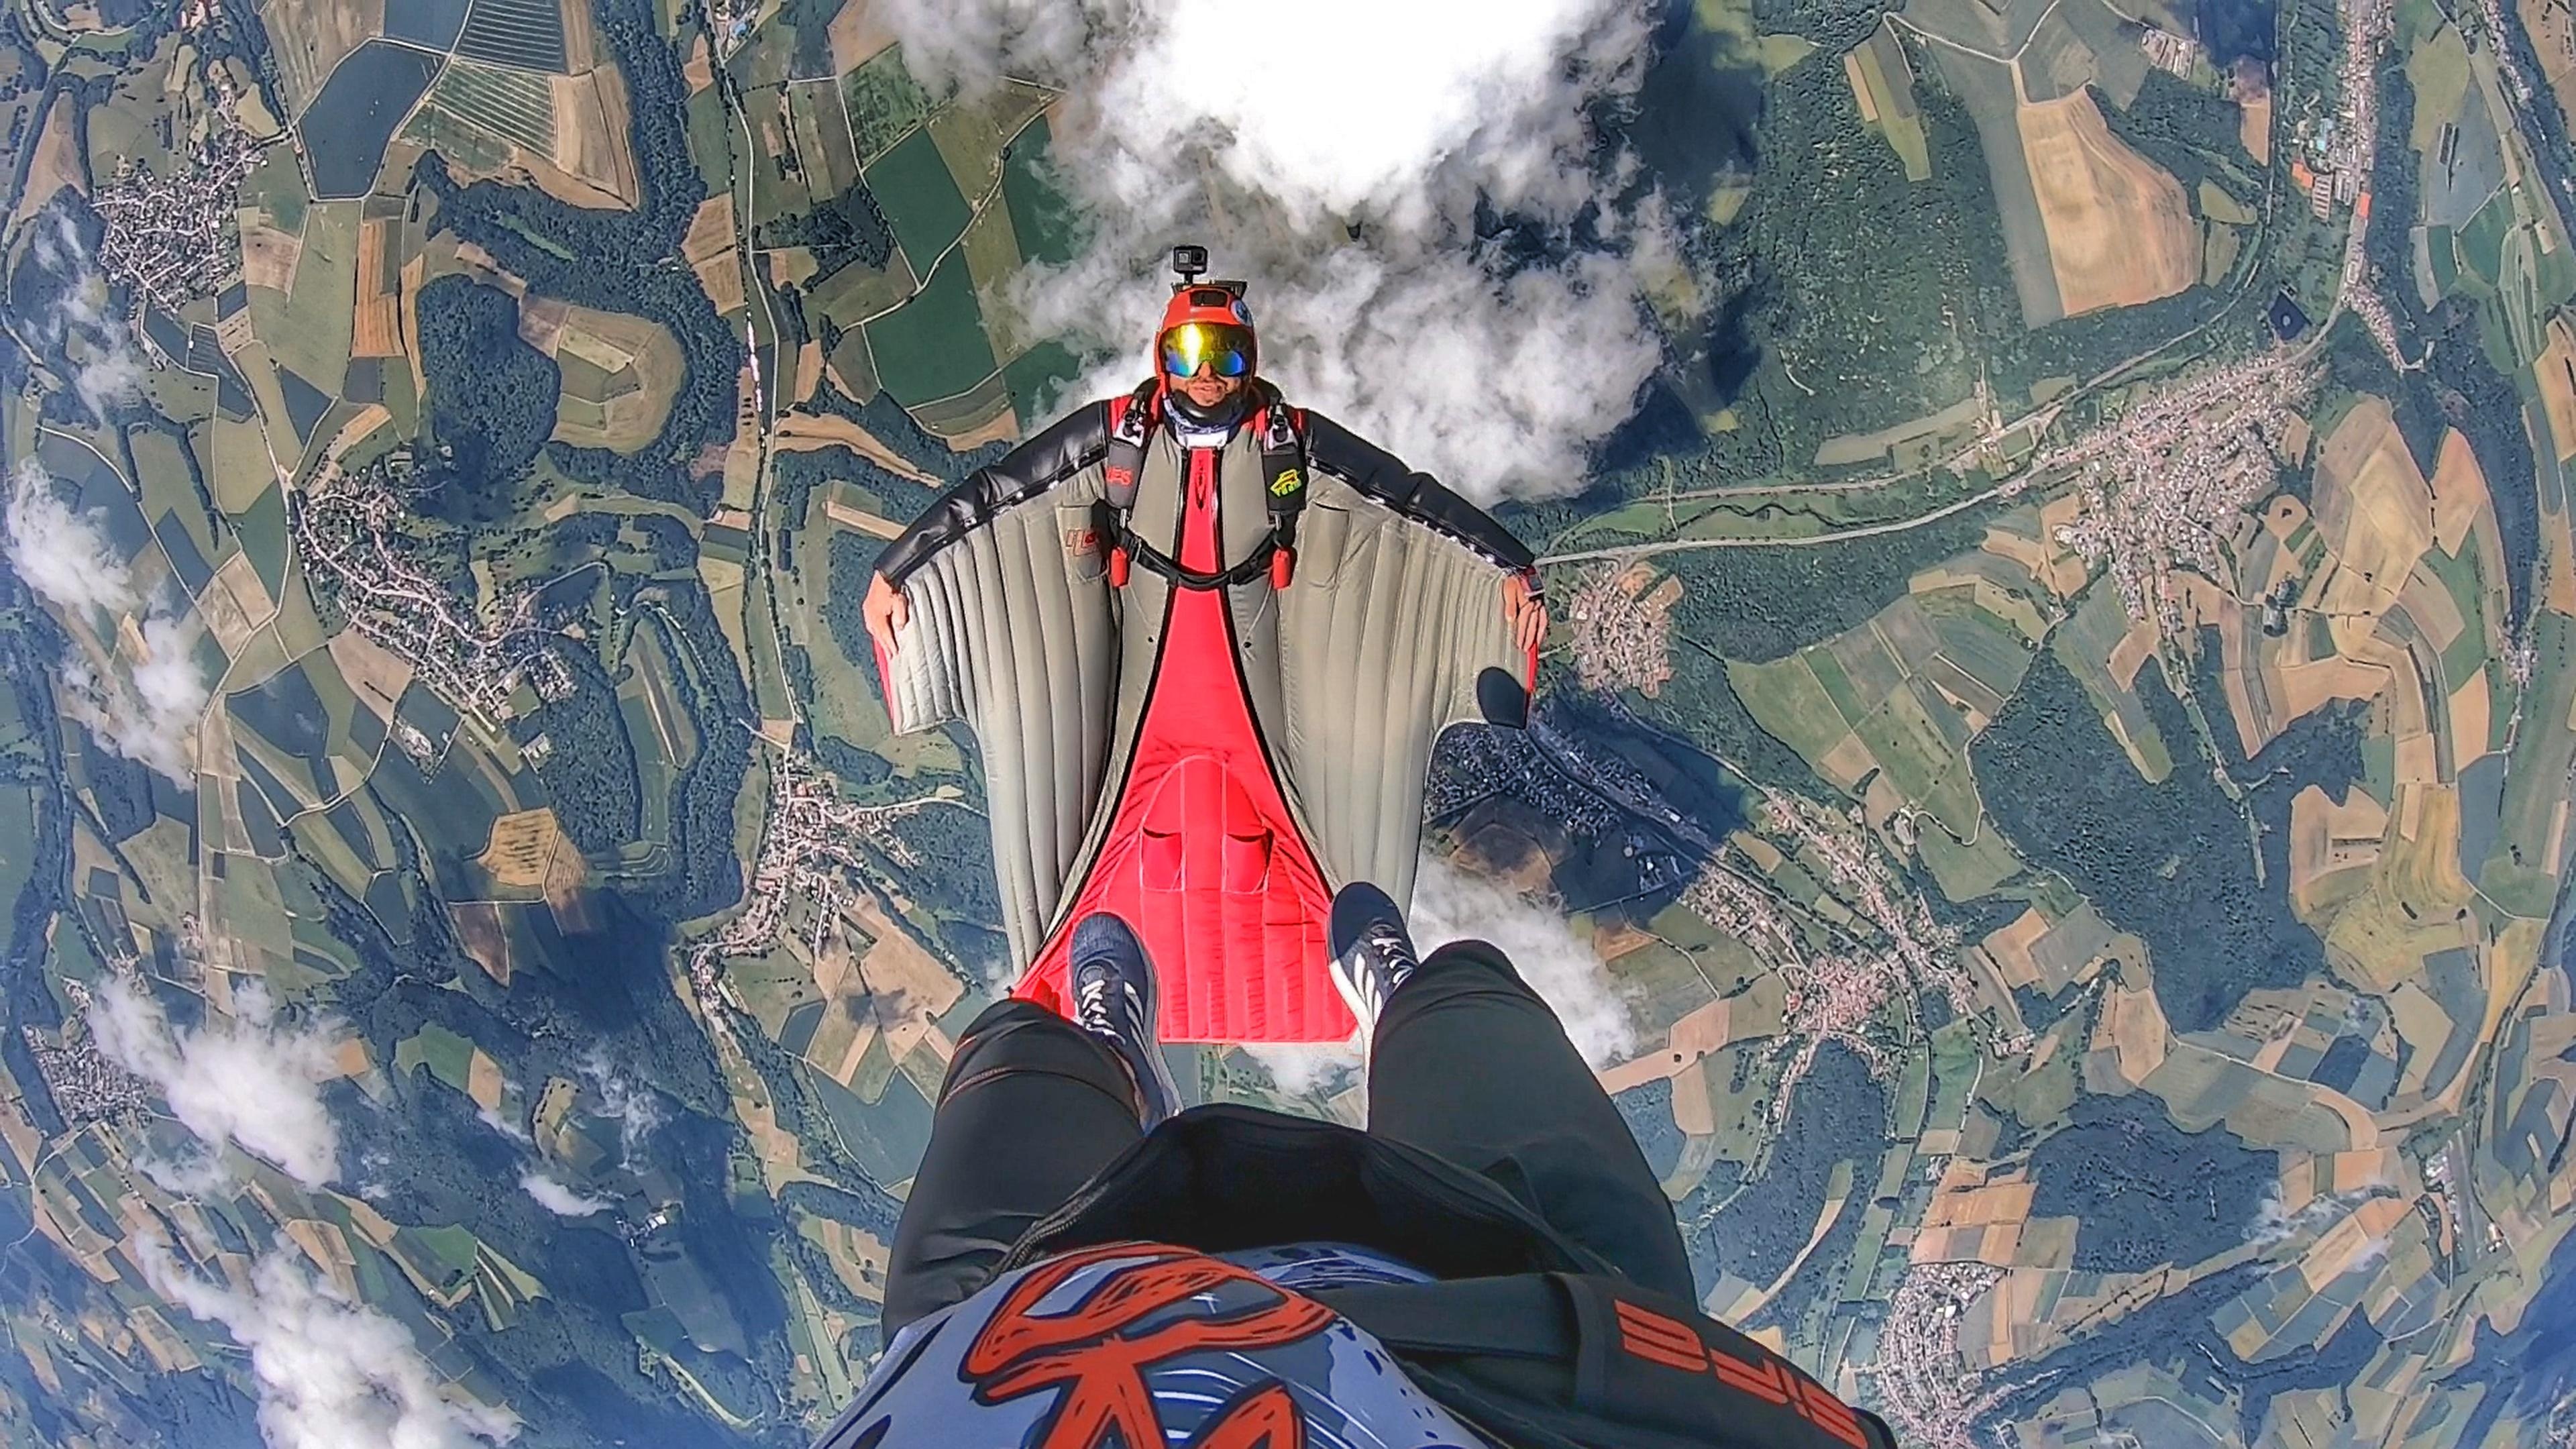 Wingsuit Flying: Pink Skyvan Boogie wingsuiting event, Tandem flying, Extreme sport. 3840x2160 4K Background.